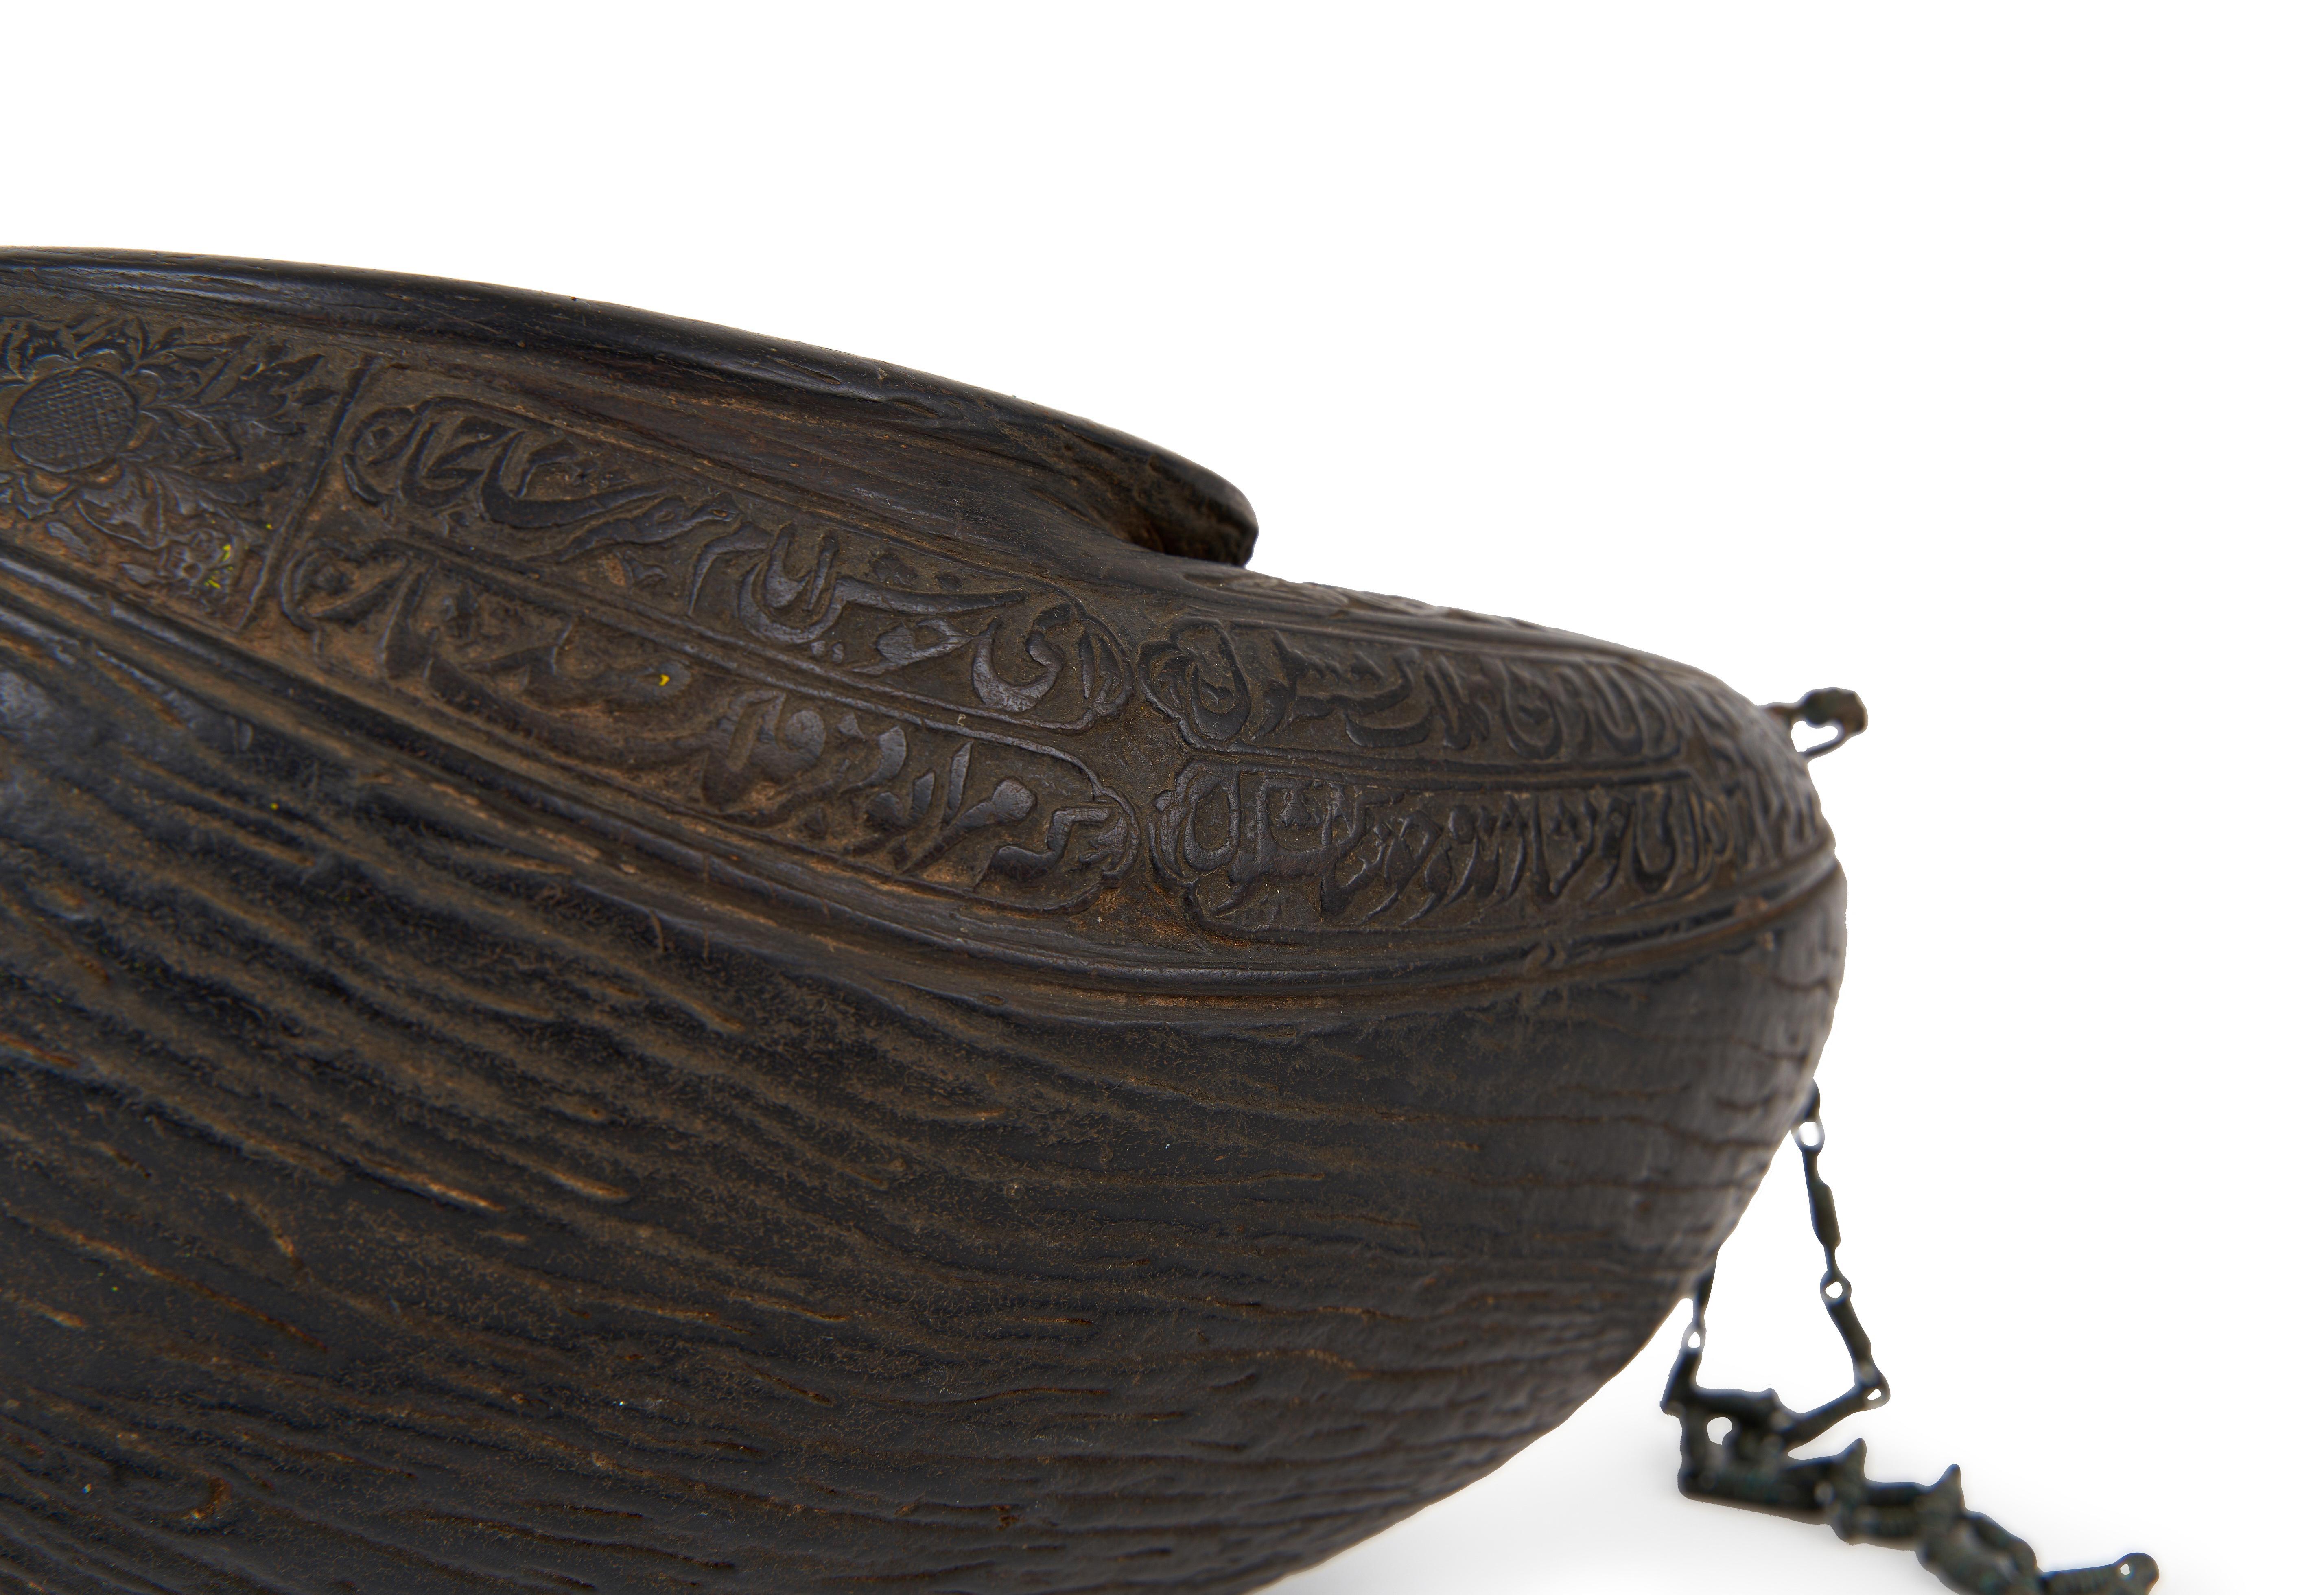 Coconut An Inscribed Coco De Mar (Kashkul) and Spike, 19th Century